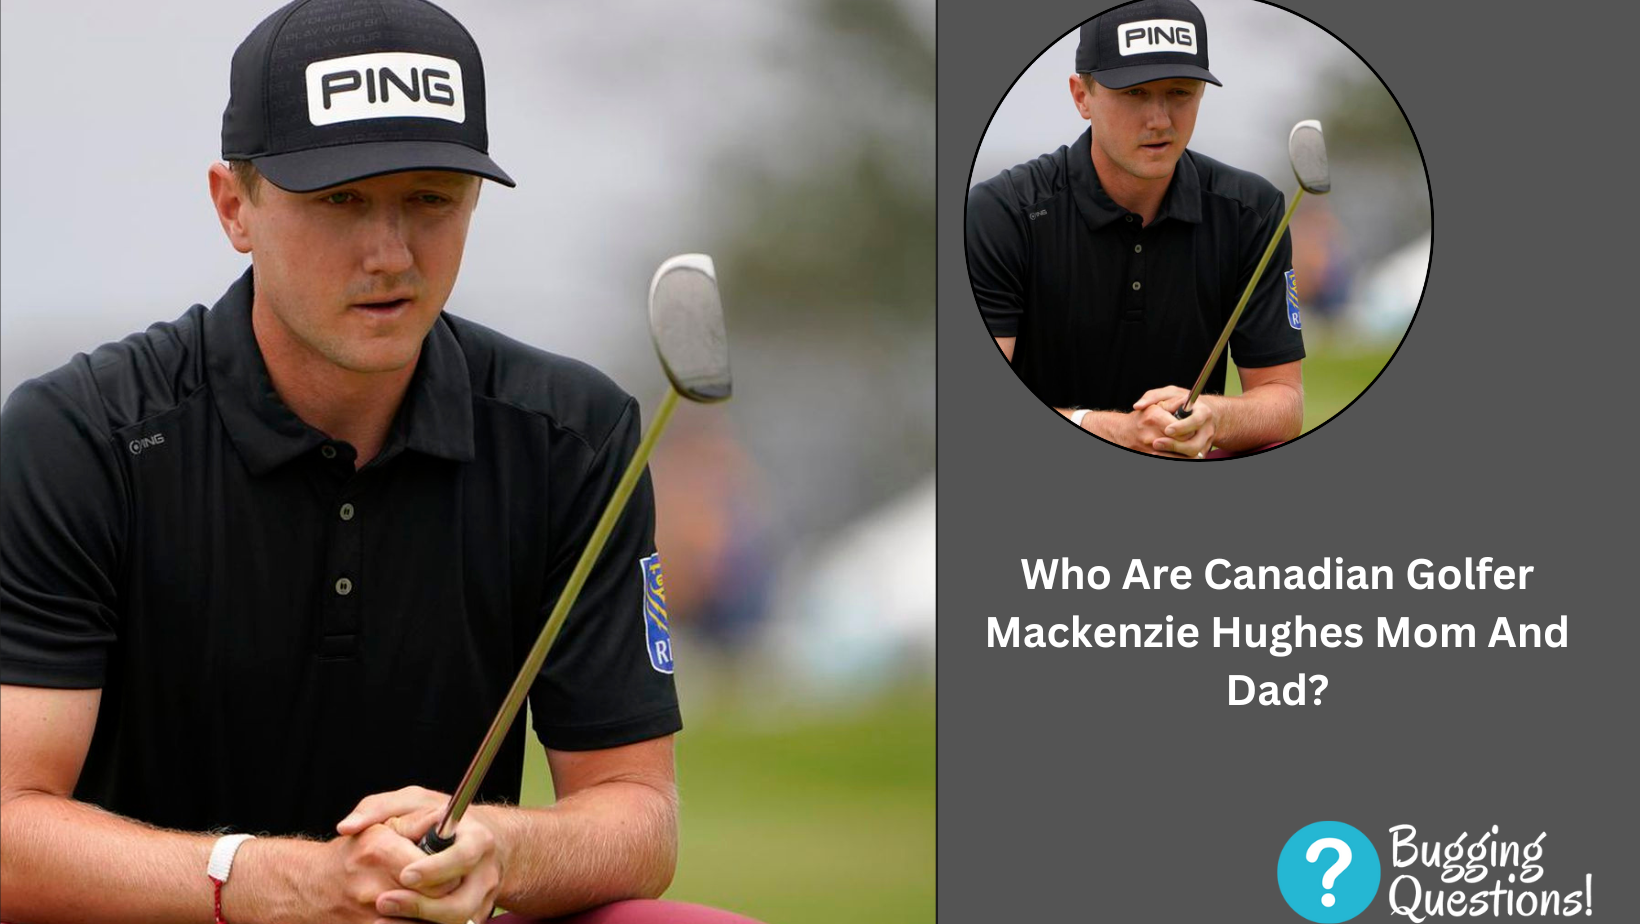 Who Are Canadian Golfer Mackenzie Hughes Mom And Dad?